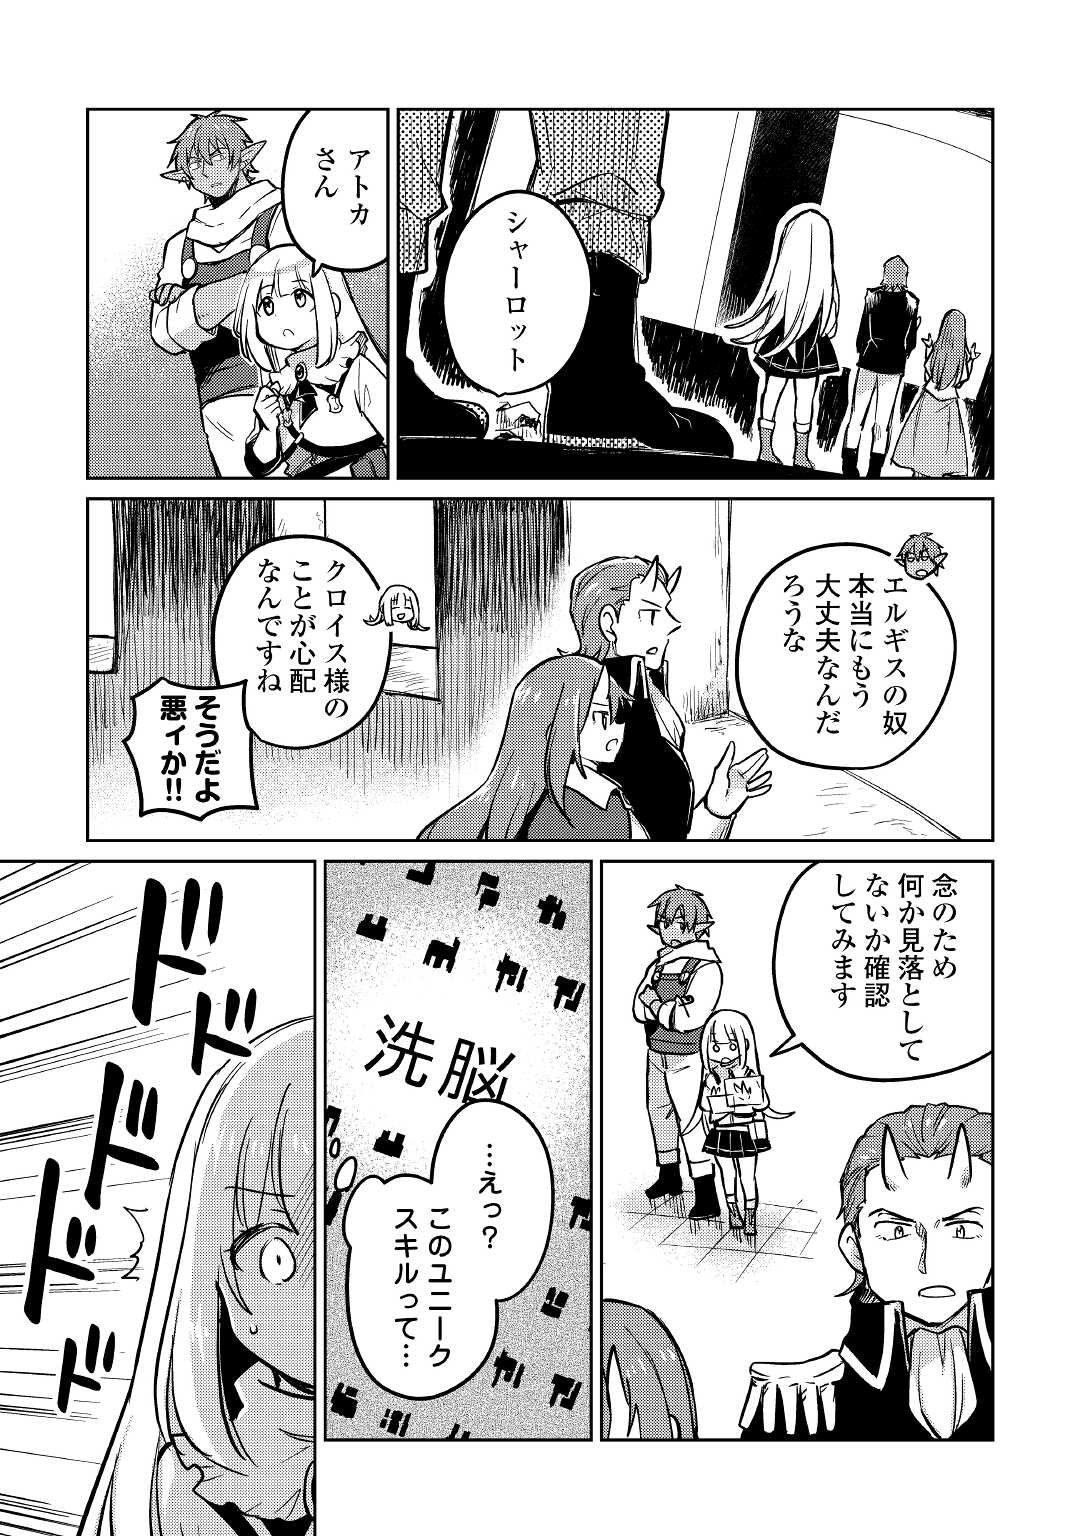 The Former Structural Researcher’s Story of Otherworldly Adventure 第40話 - Page 21